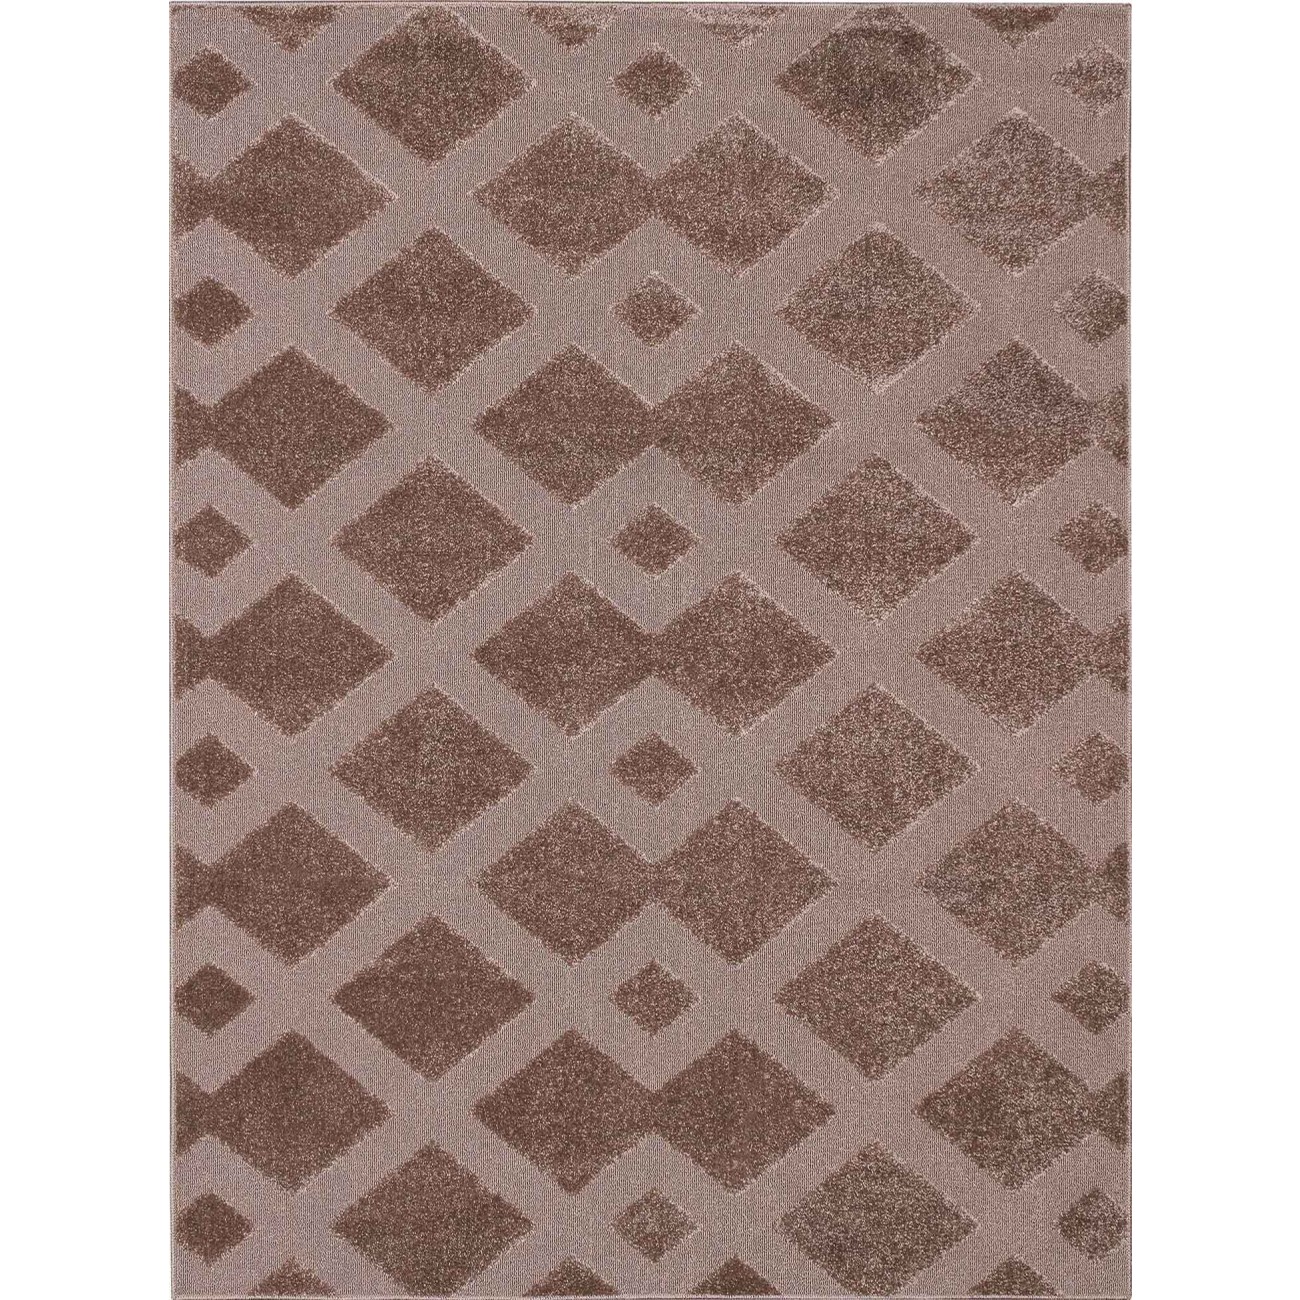 Tapete Realce Trilho Taupe - 150x200